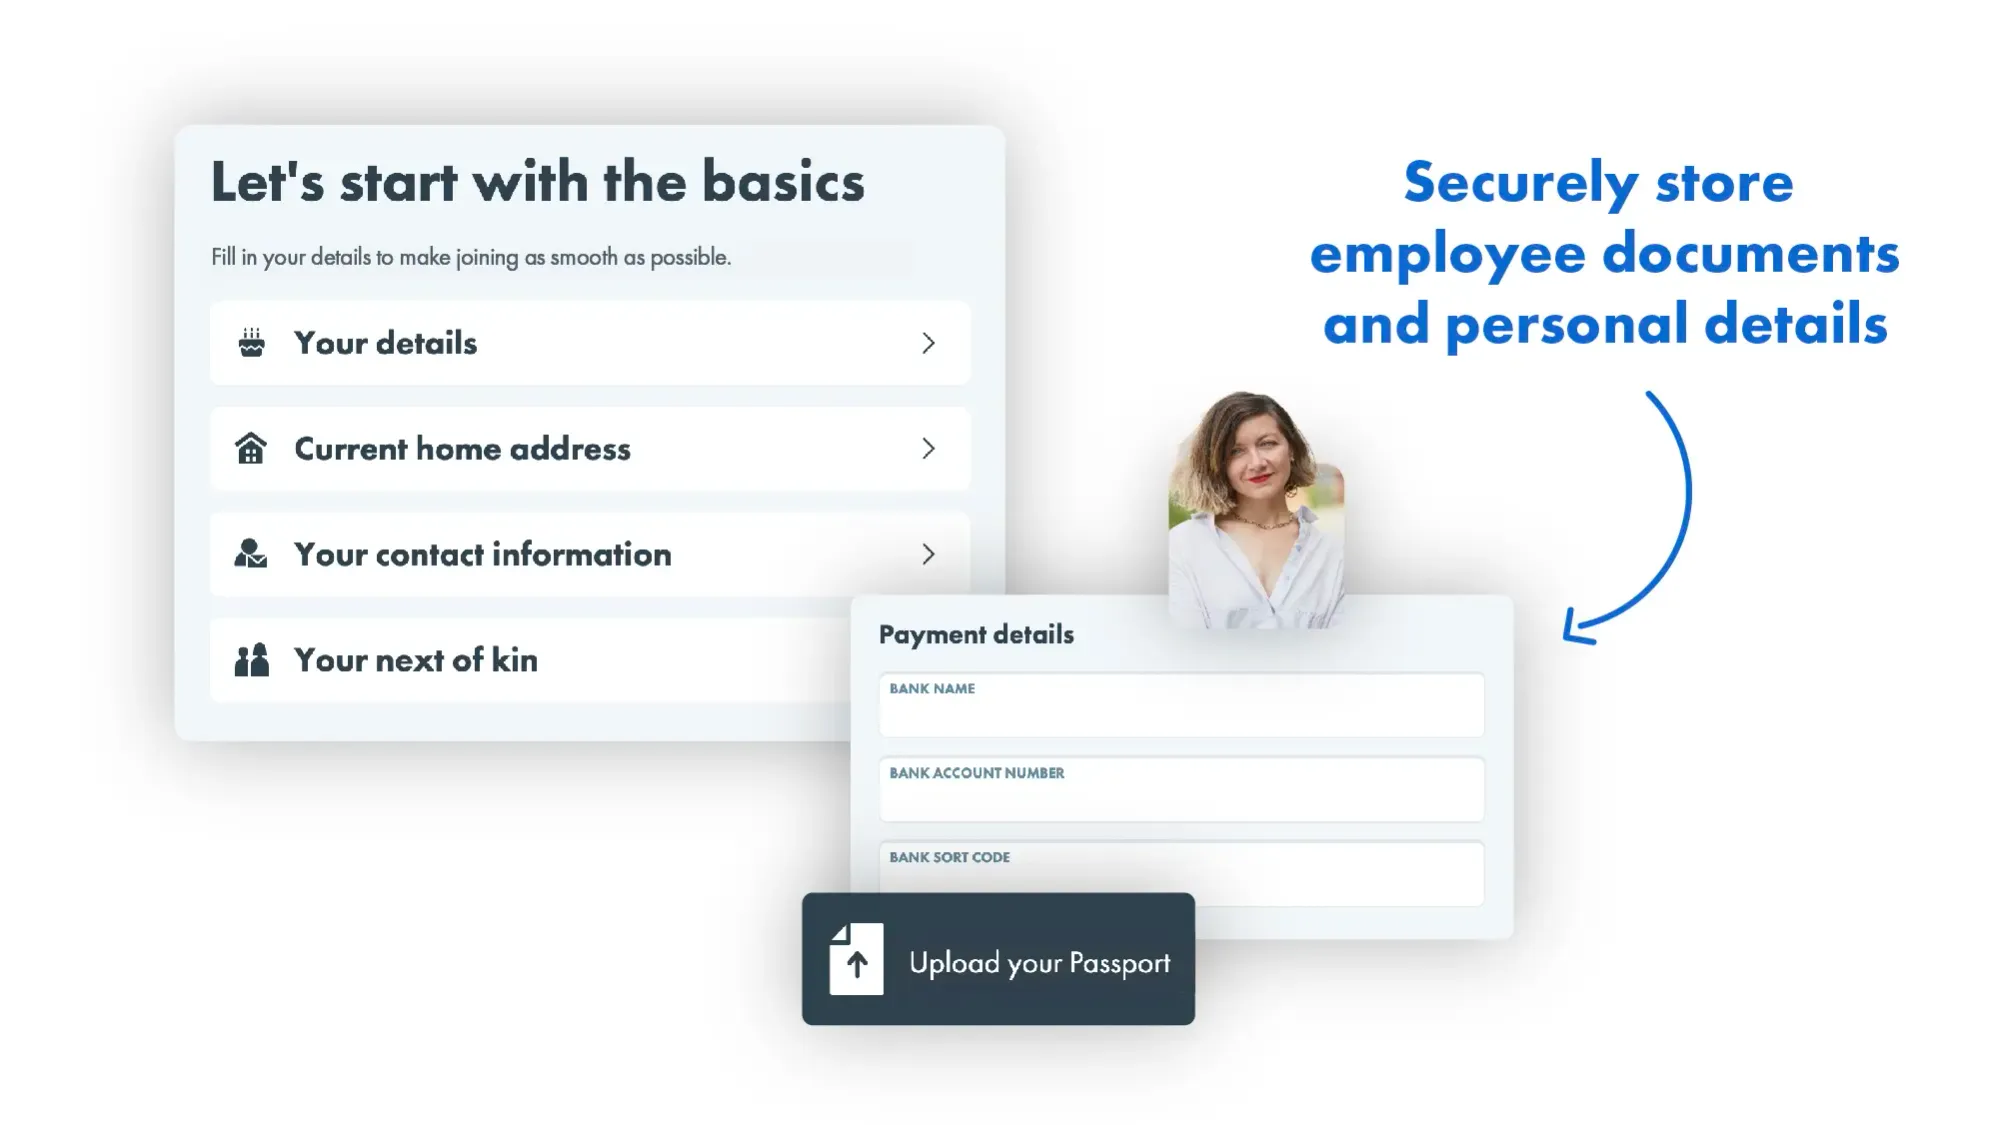 Securely store employee details with Charlie